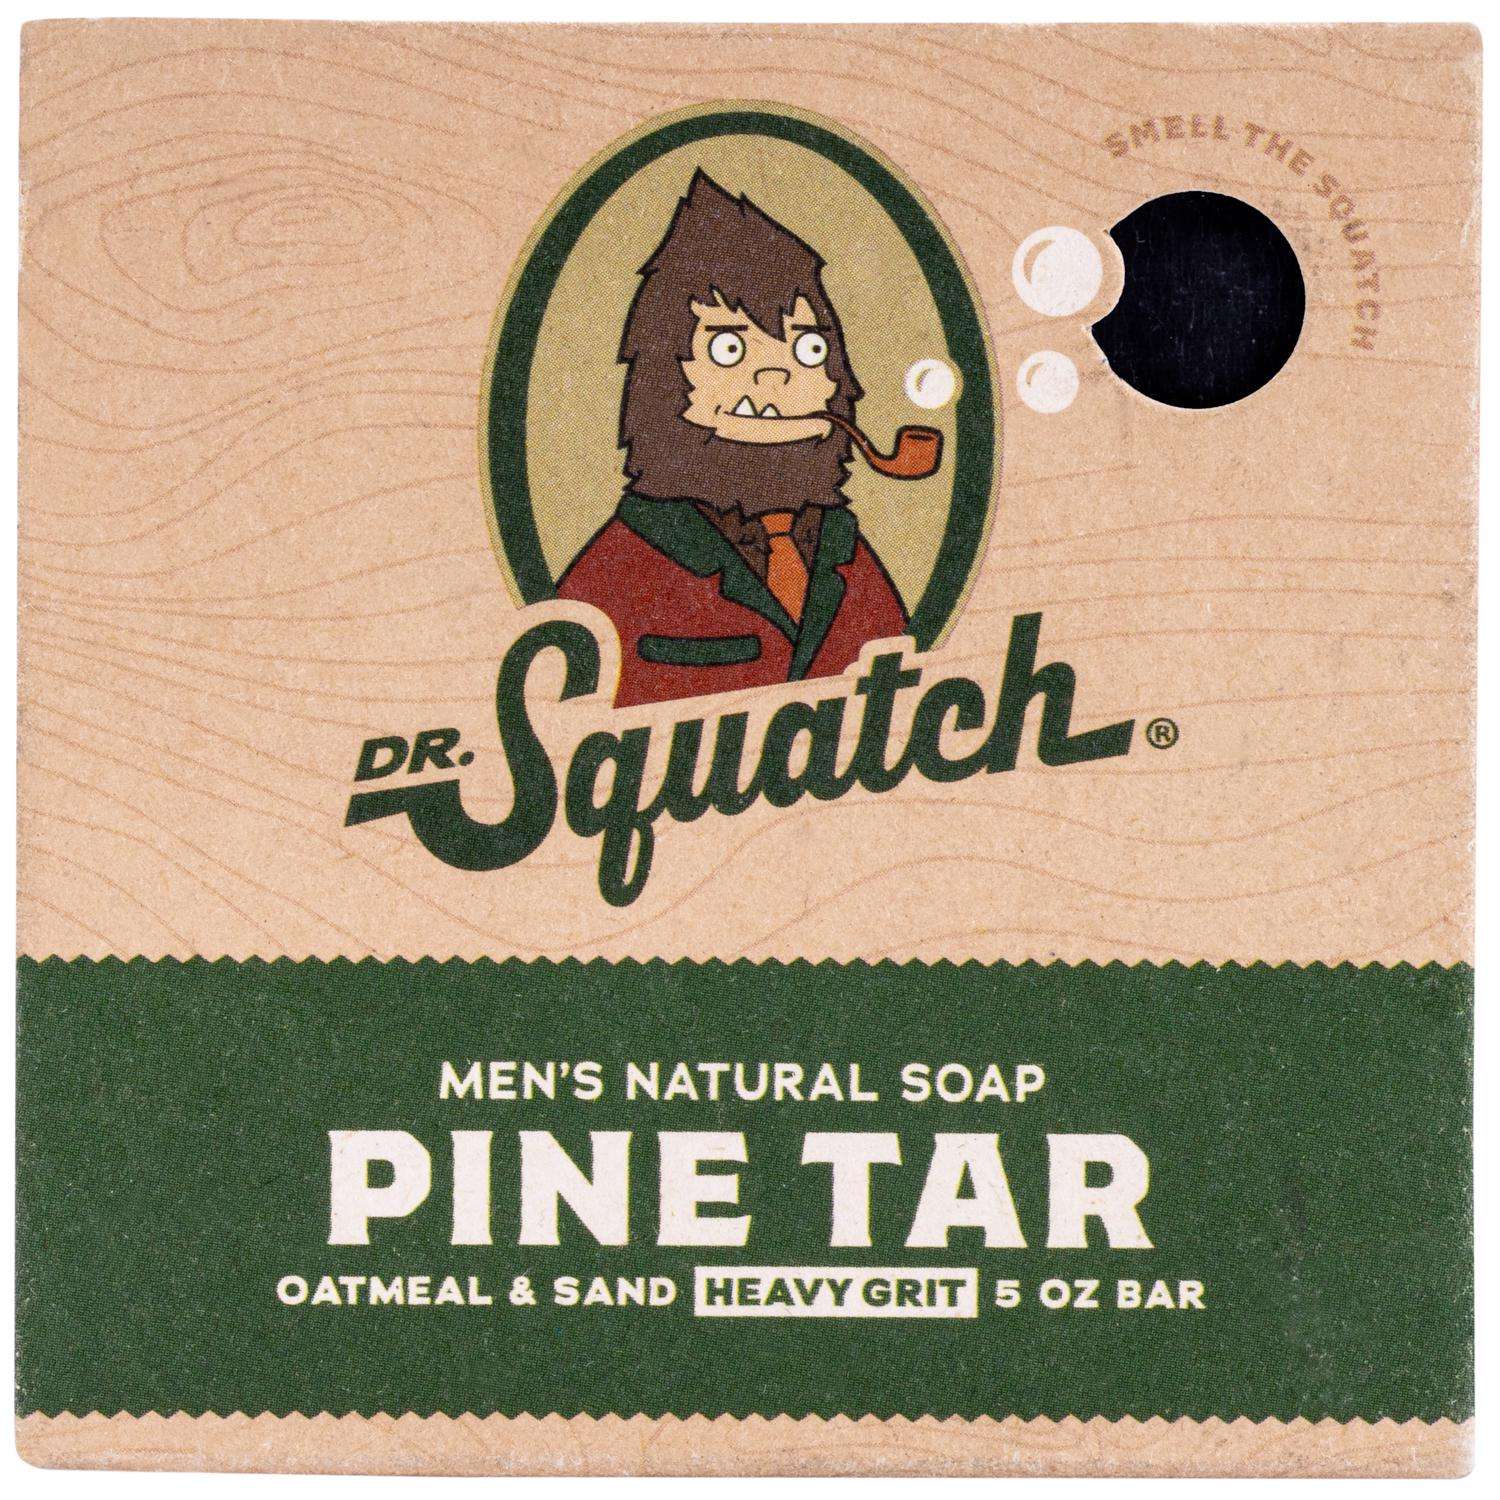 Dr. Squatch Snowy Pine Tar Limited Edition Soap- BRAND NEW 